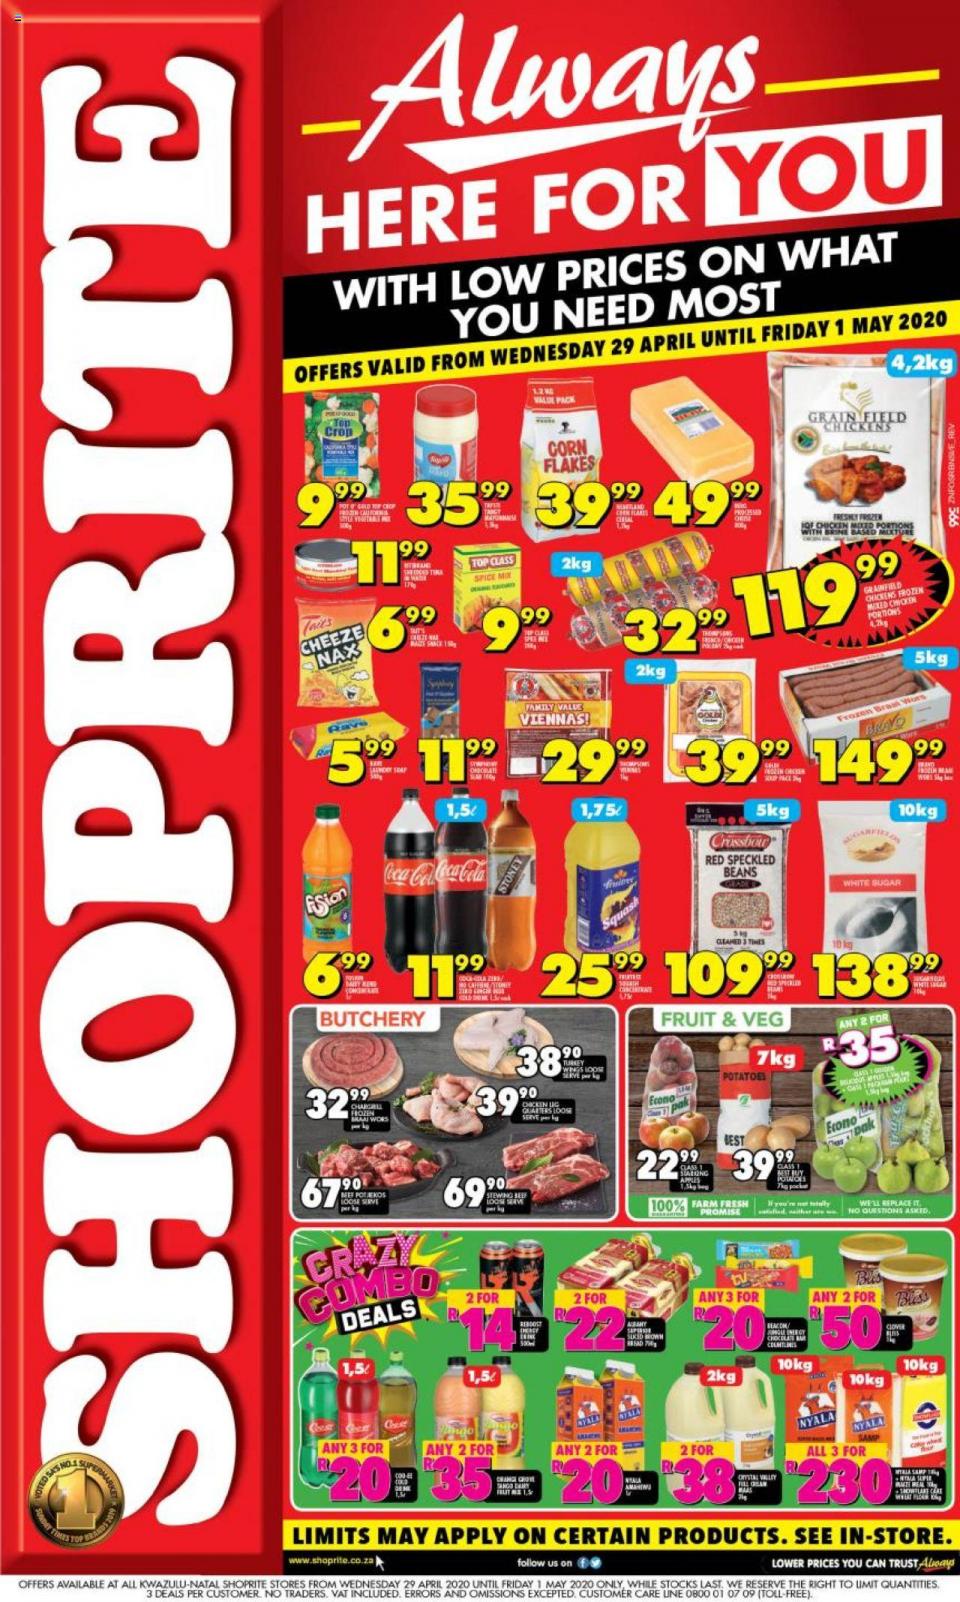 Shoprite Specials Always Here For You 29 April 2020